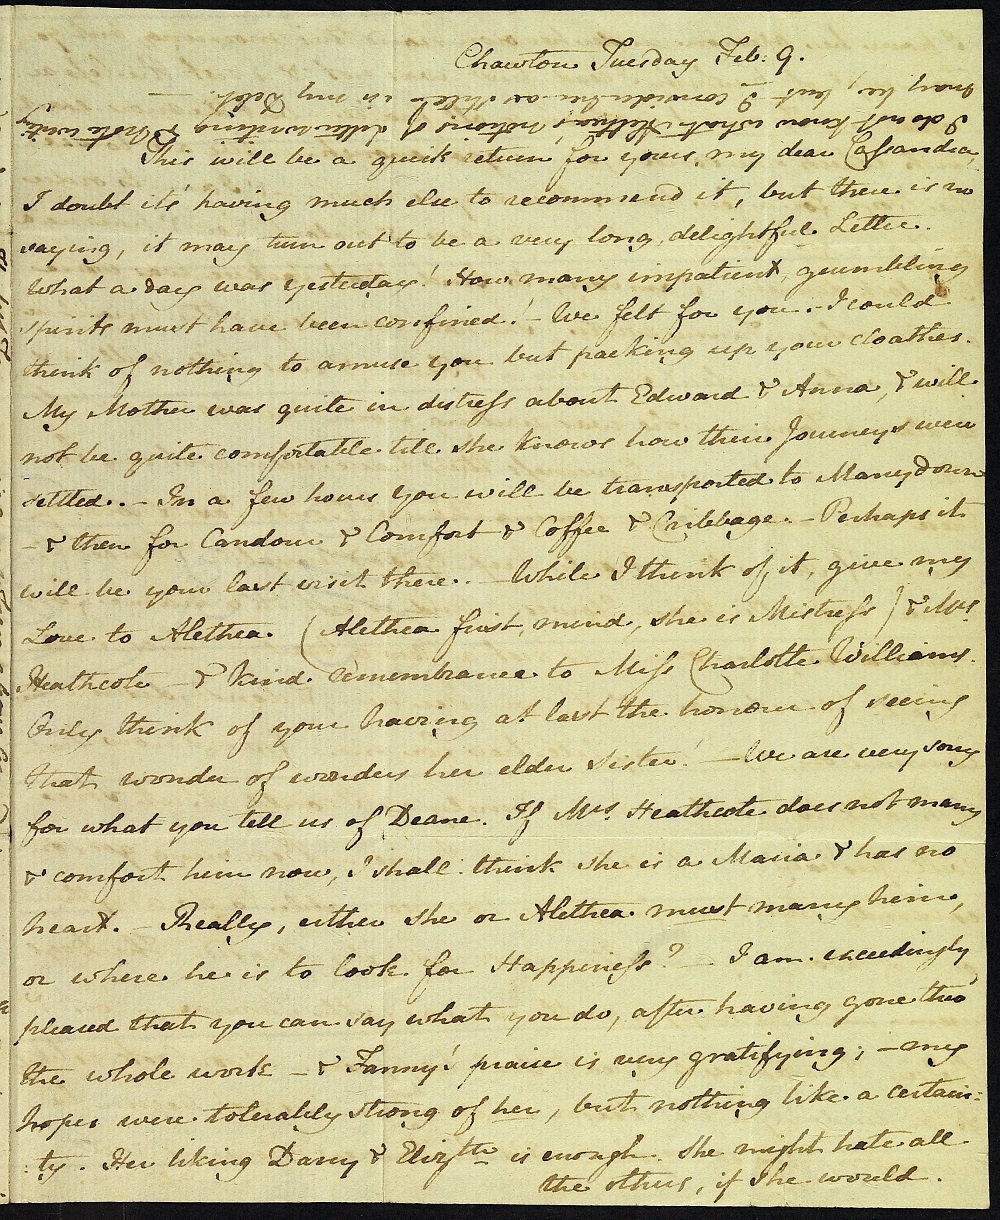 Letter from Jane Austen to Cassandra Austen, 9th February 1813. Page 1